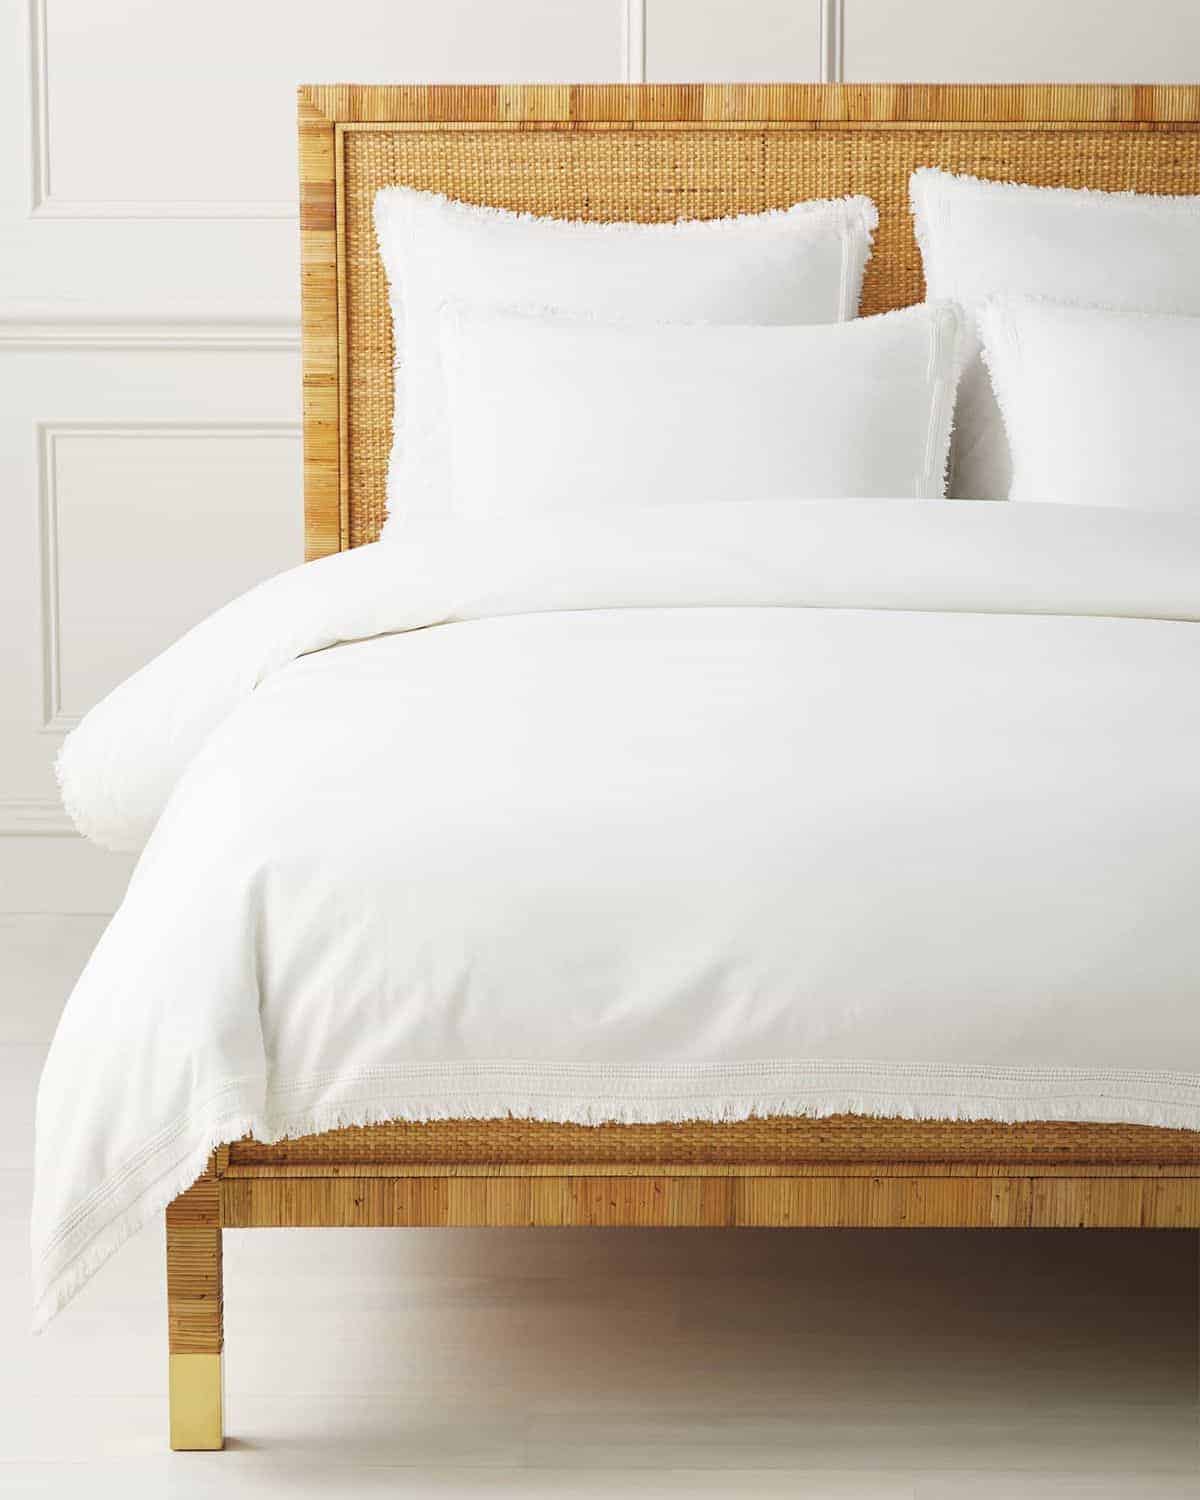 A rattan bed frame with white bedding and layered pillows from Serena and Lily.